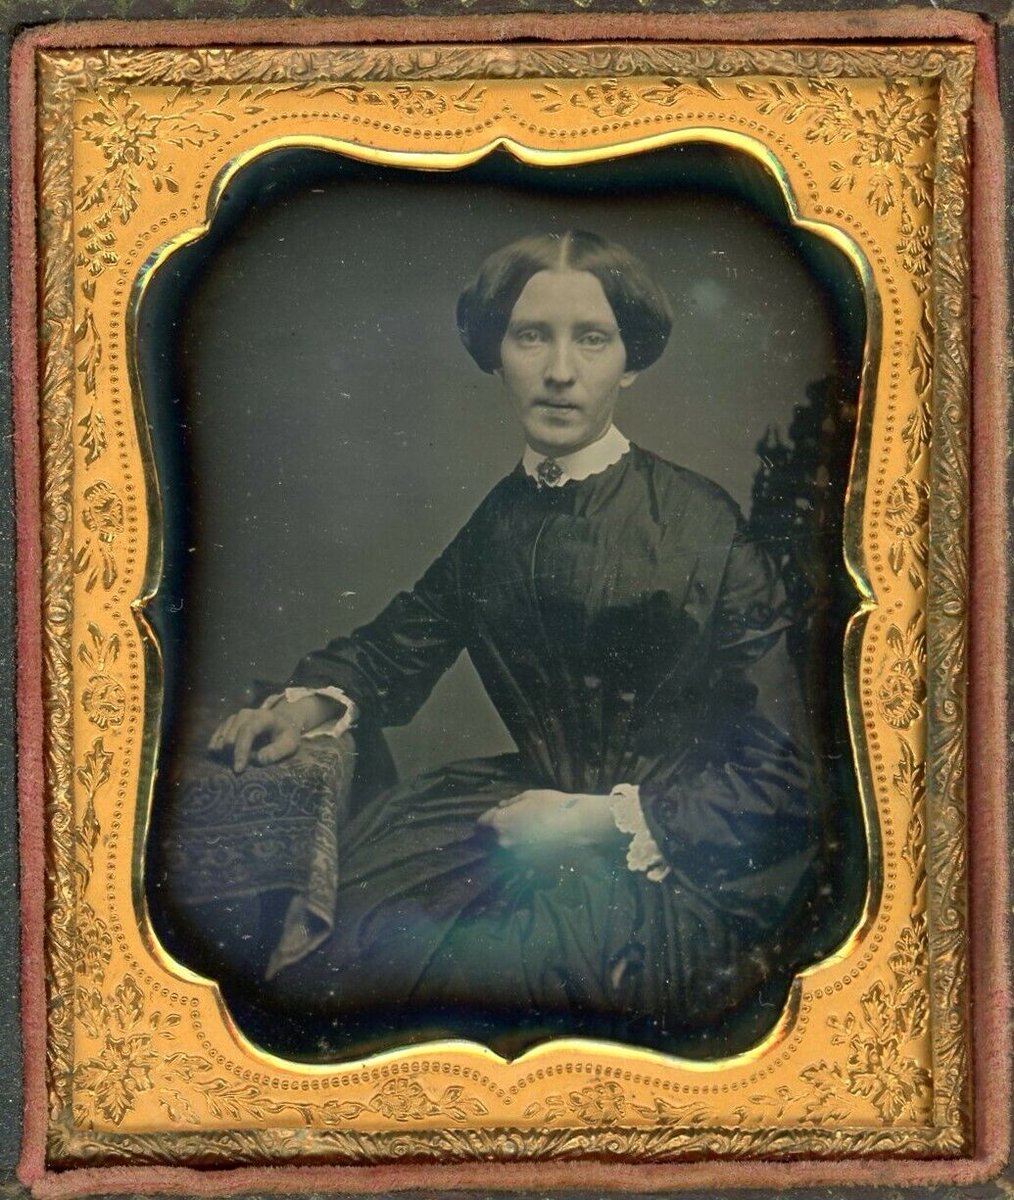 Daguerreotype of a woman from the estate of Governor Frederick Payne.  This image is from our collection.
#daguerreotype #photography #earlyphotography